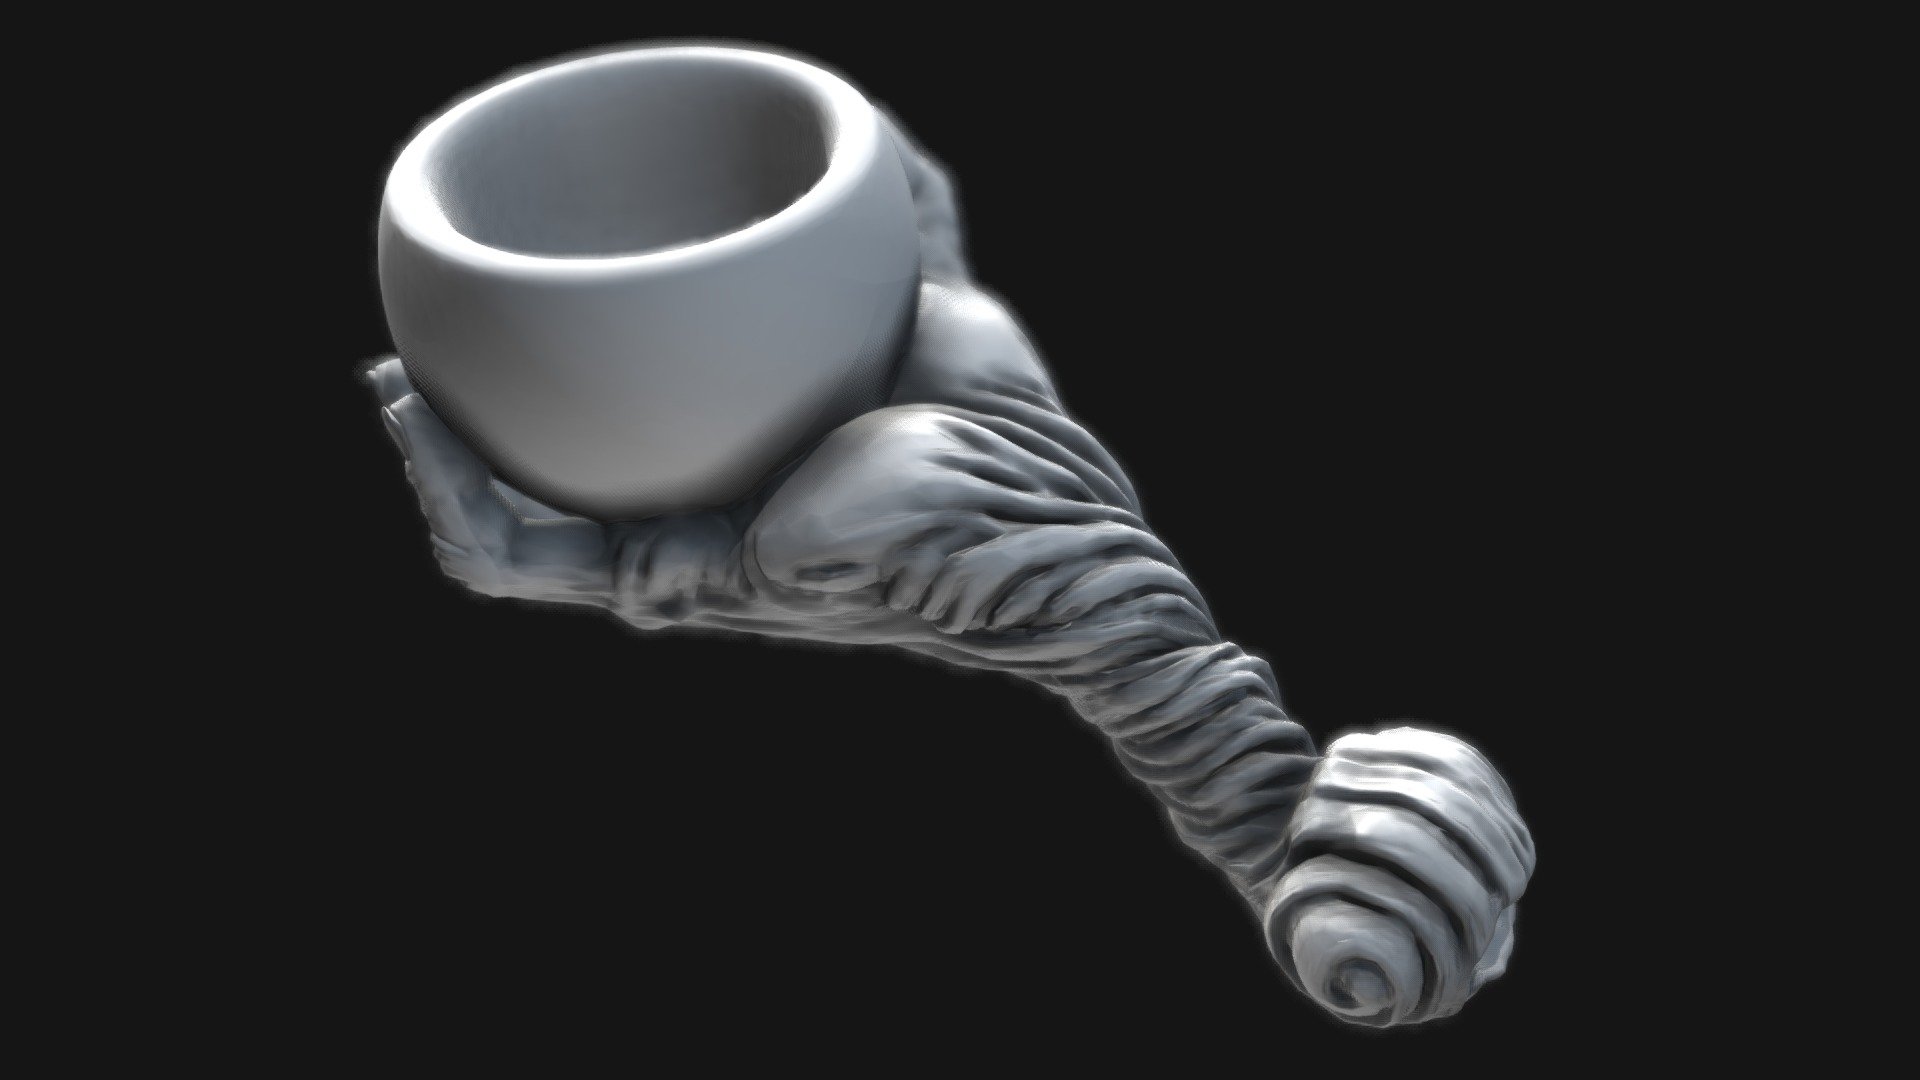 Downloadable! Print on ceramic. A pipe i made for 3d printing. Made in Zbrush 3d model